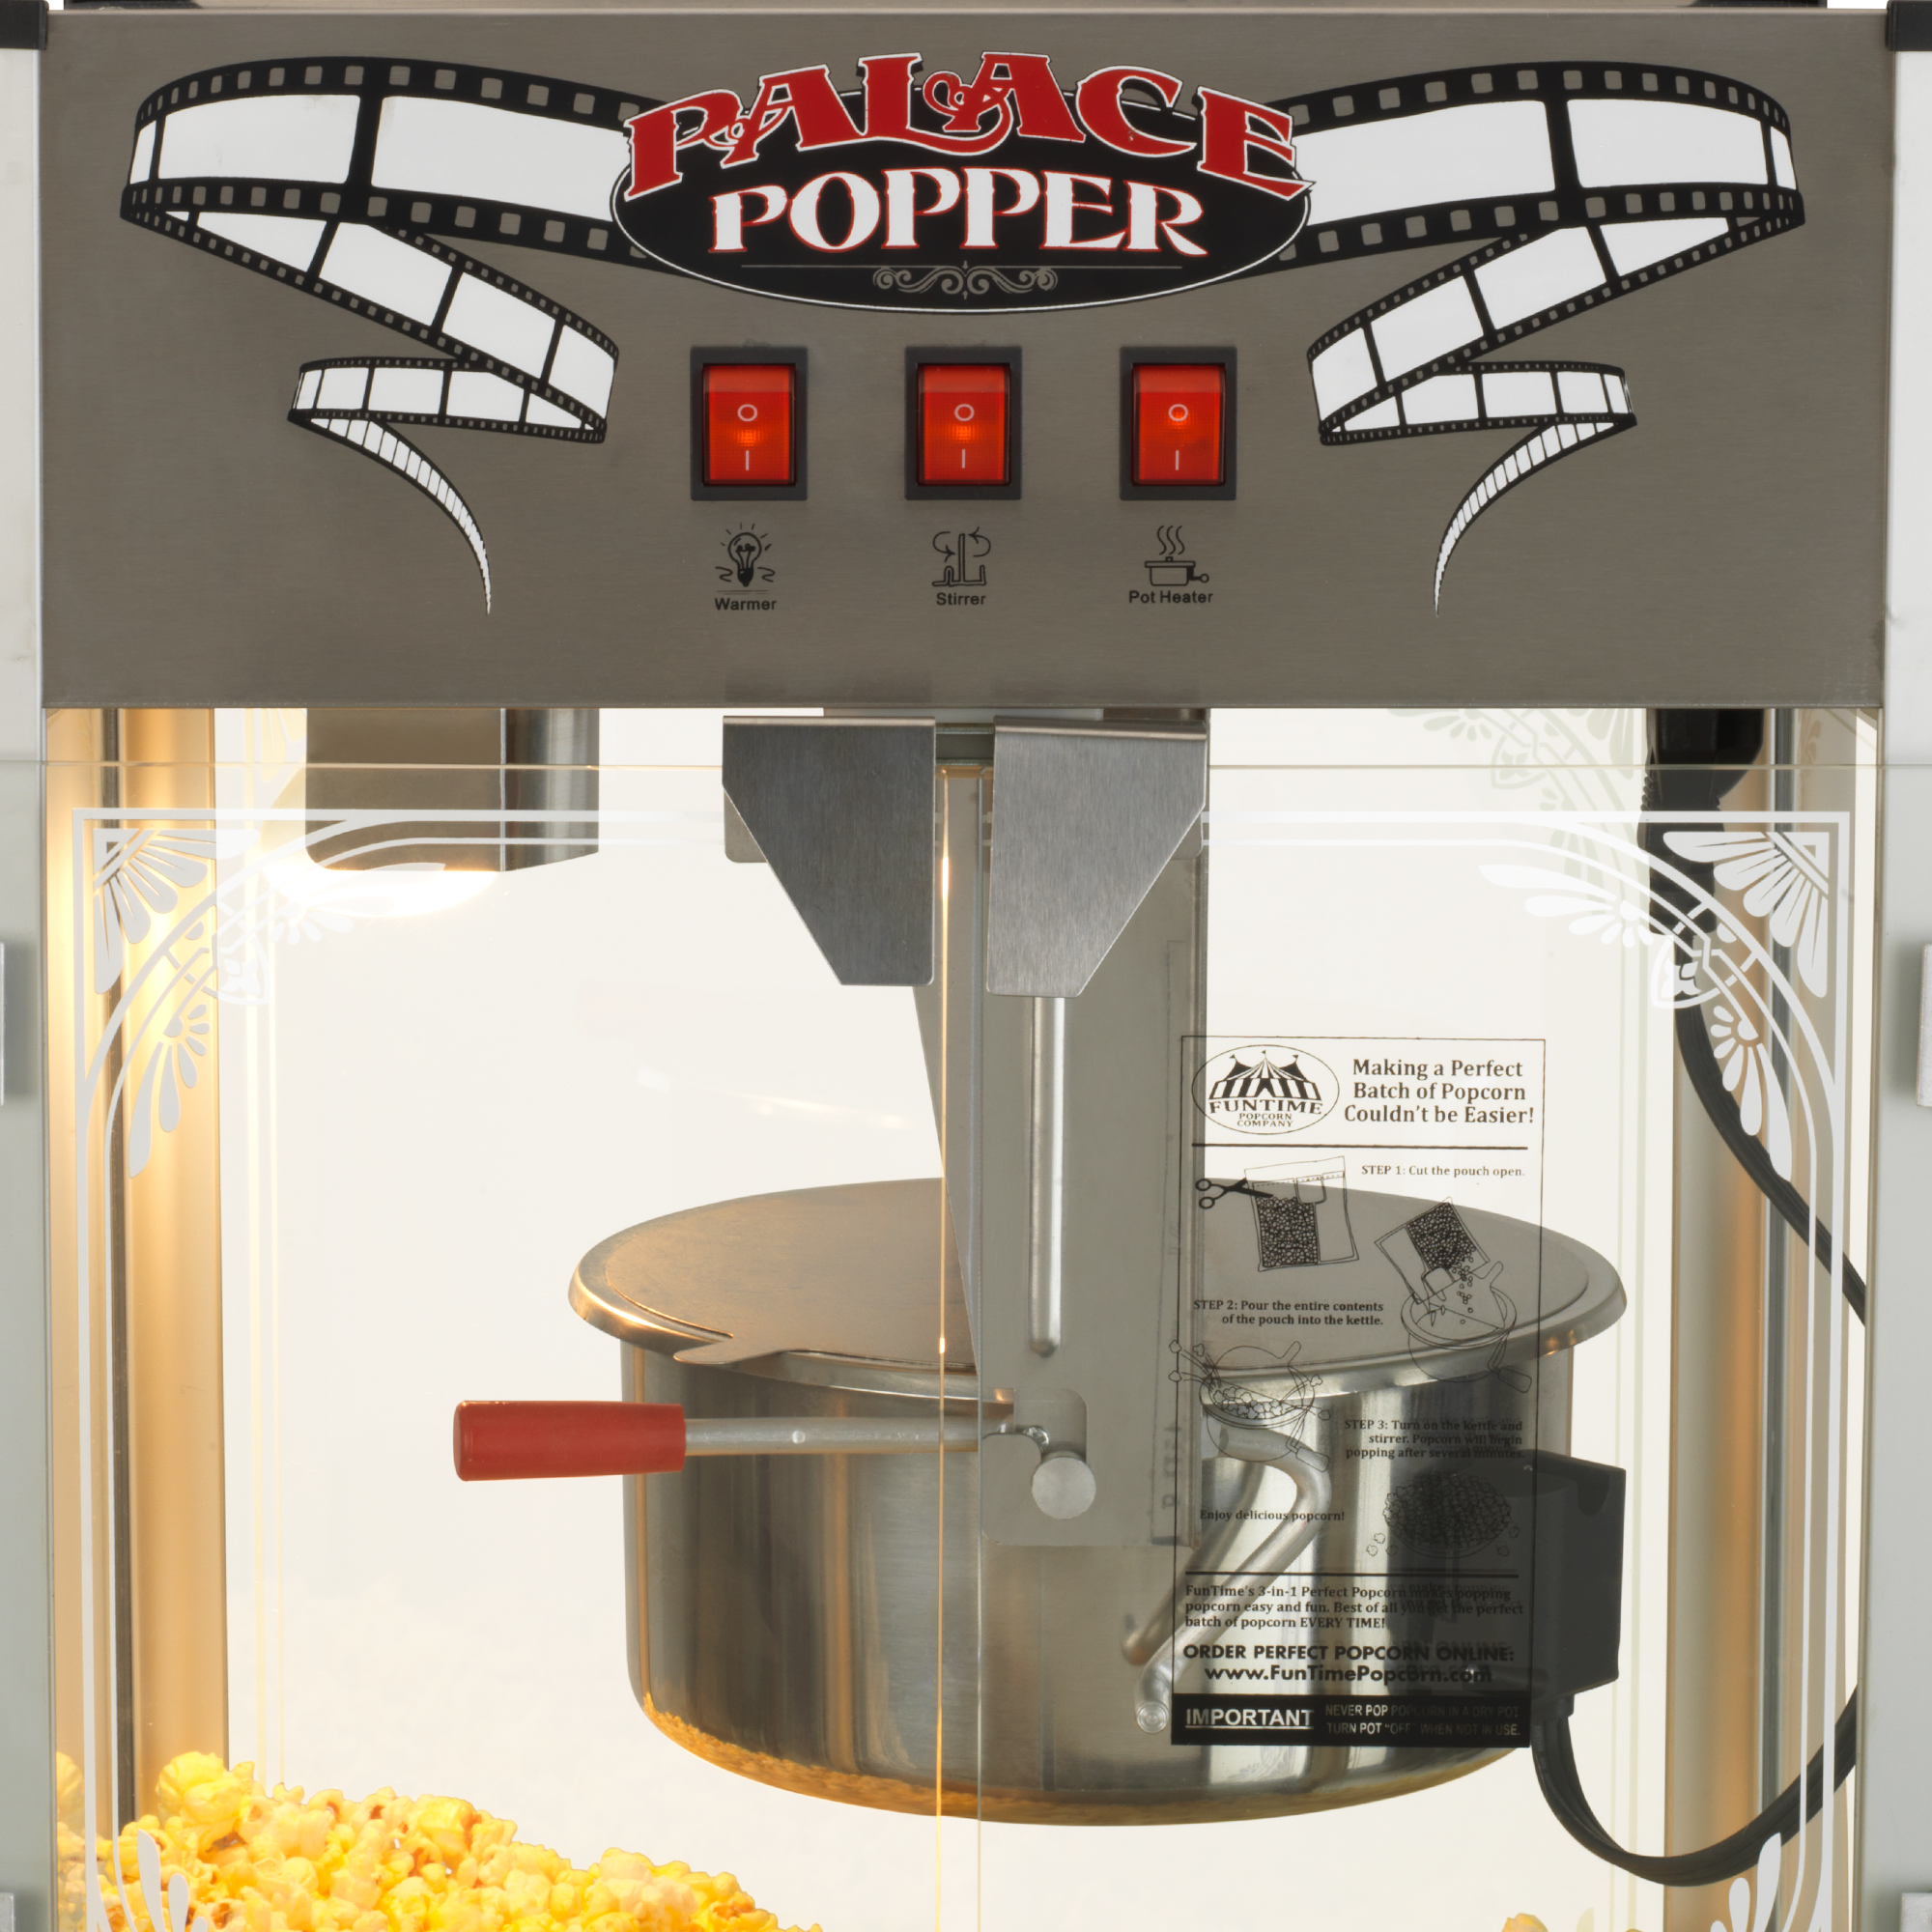 Great Northern Popcorn 6-Cup Capacity Vintage-Style Air Popper Countertop Popcorn Machine - Red